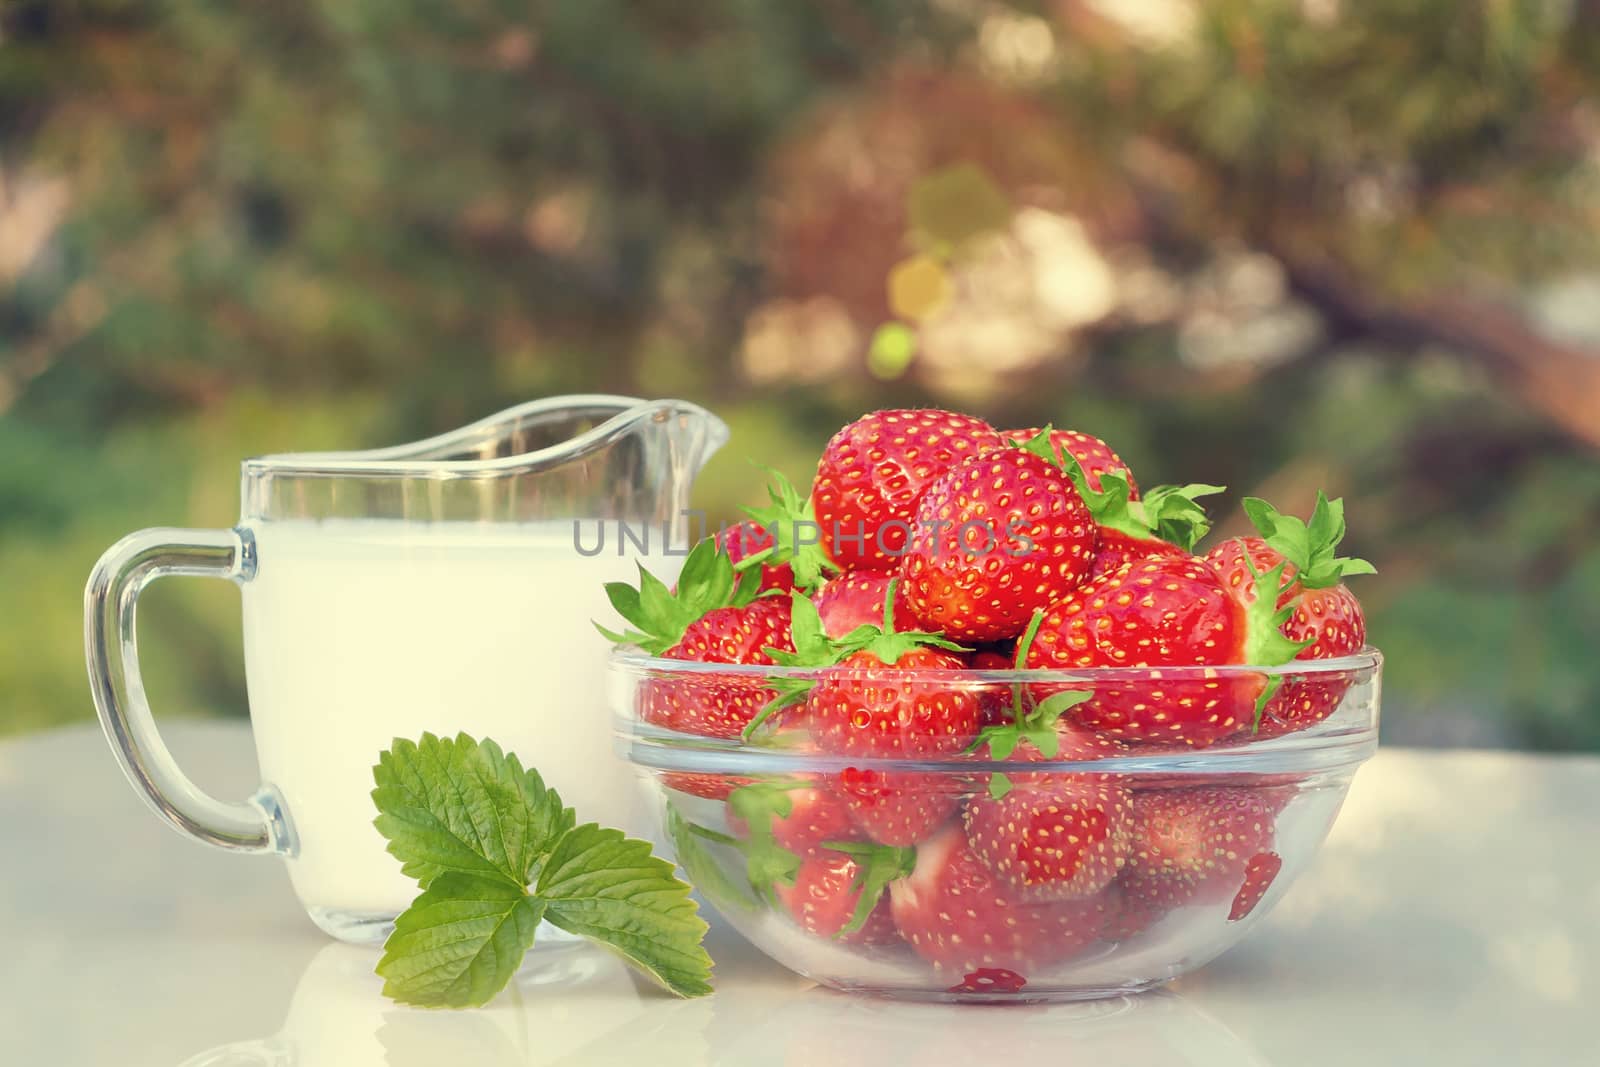 Fresh ripe strawberries in a bowl and iogurt on a white table outdoors on a summer day.